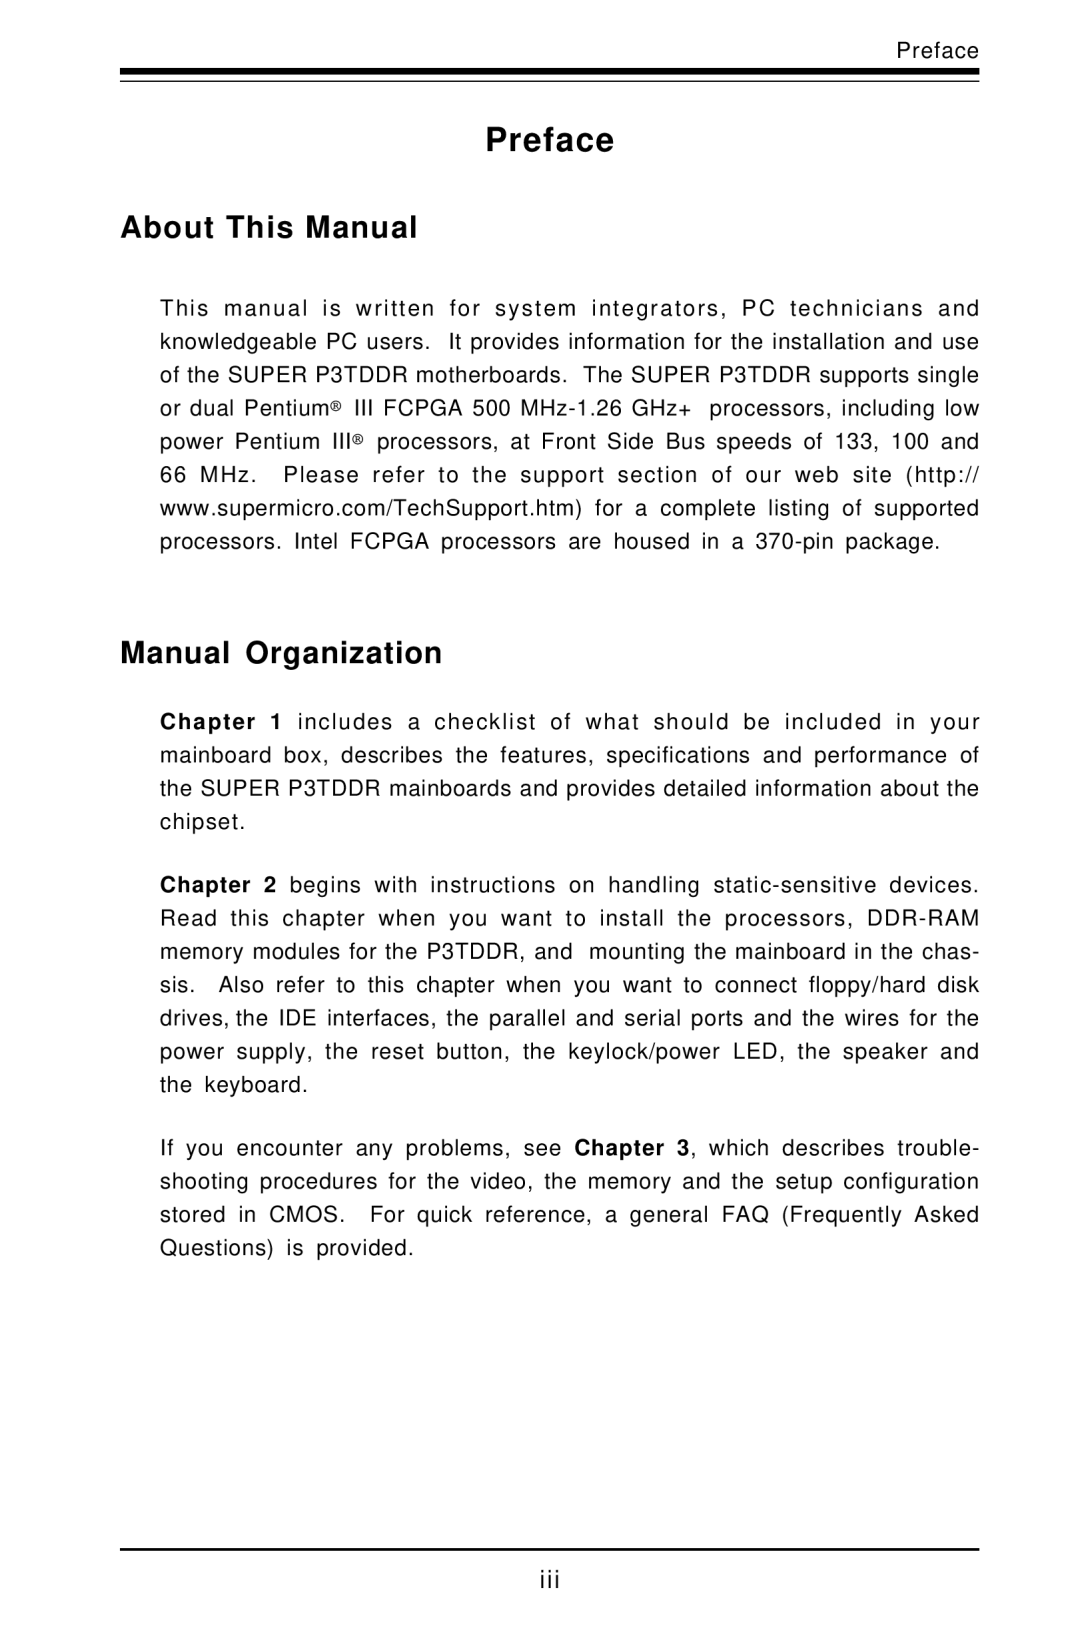 SUPER MICRO Computer SUPER, P3TDDR user manual Preface, About This Manual Manual Organization 